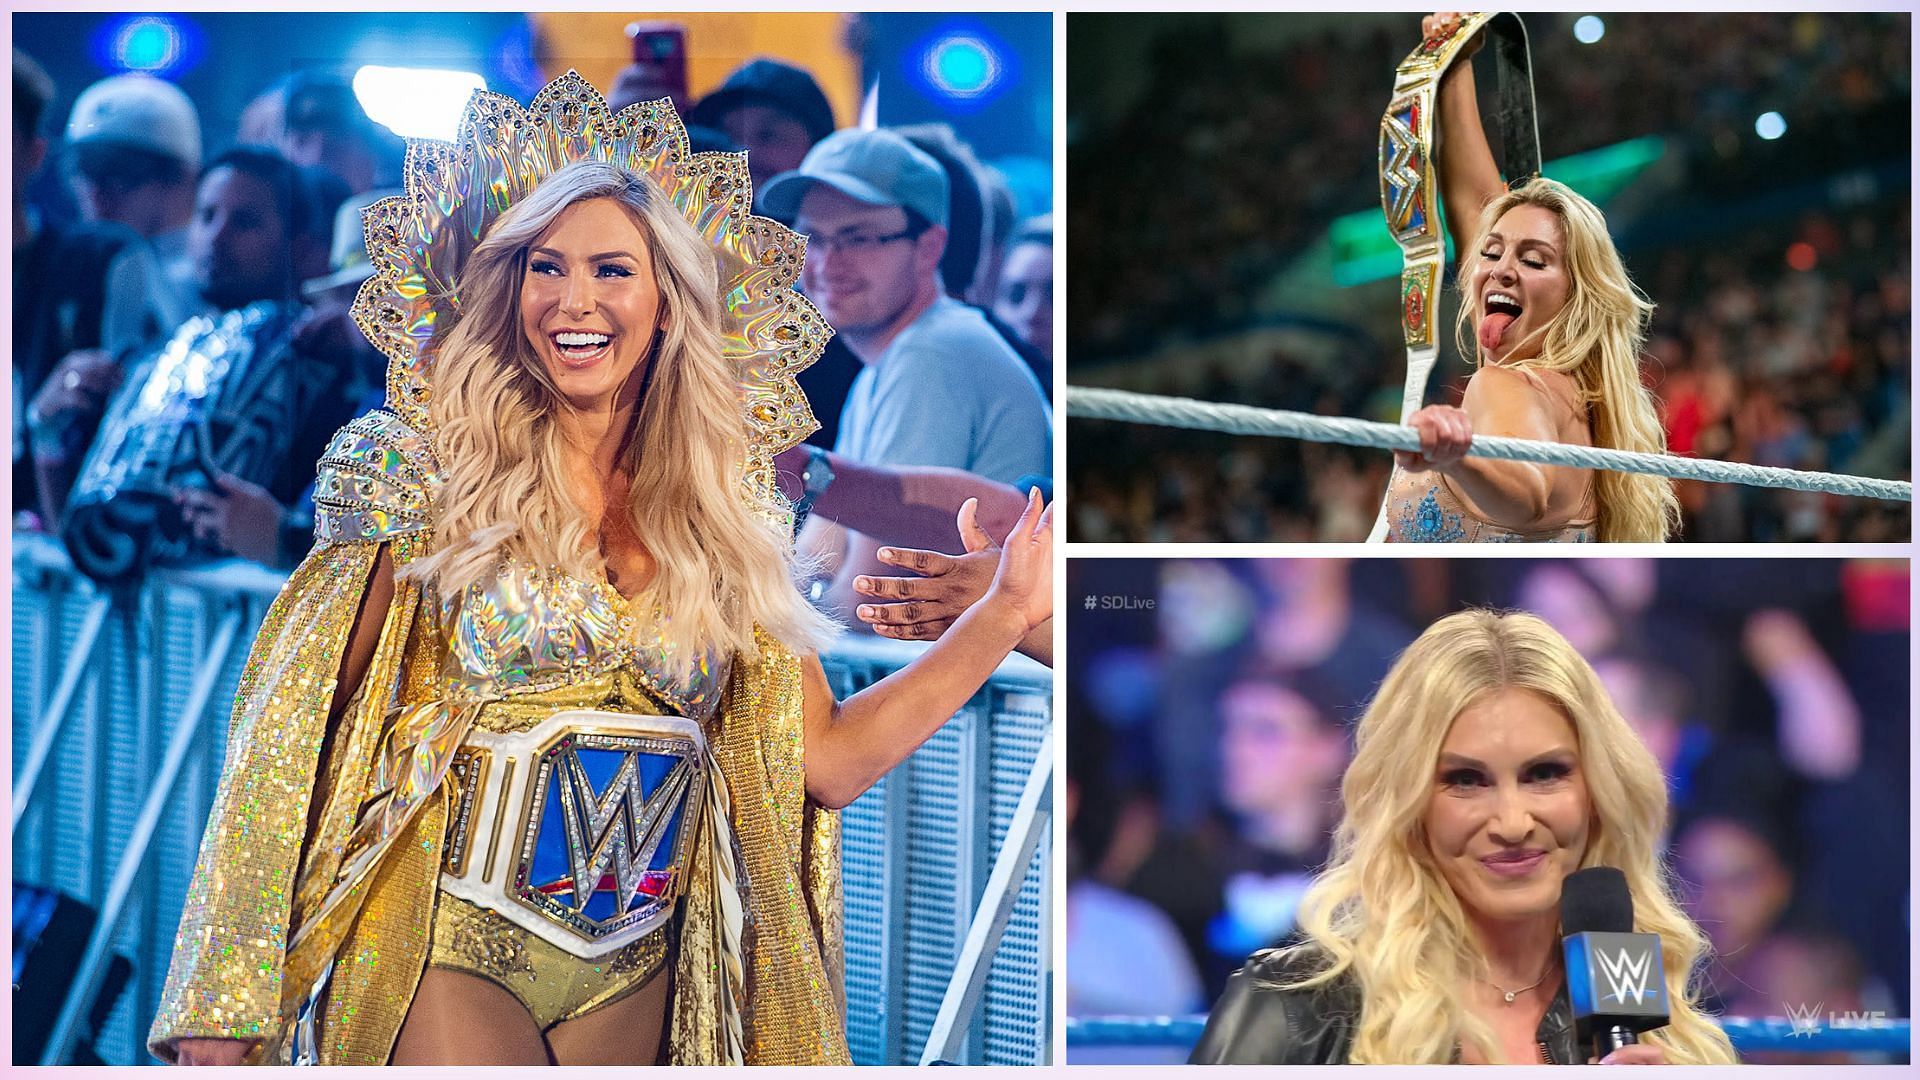 Charlotte Flair is a 14-time Women